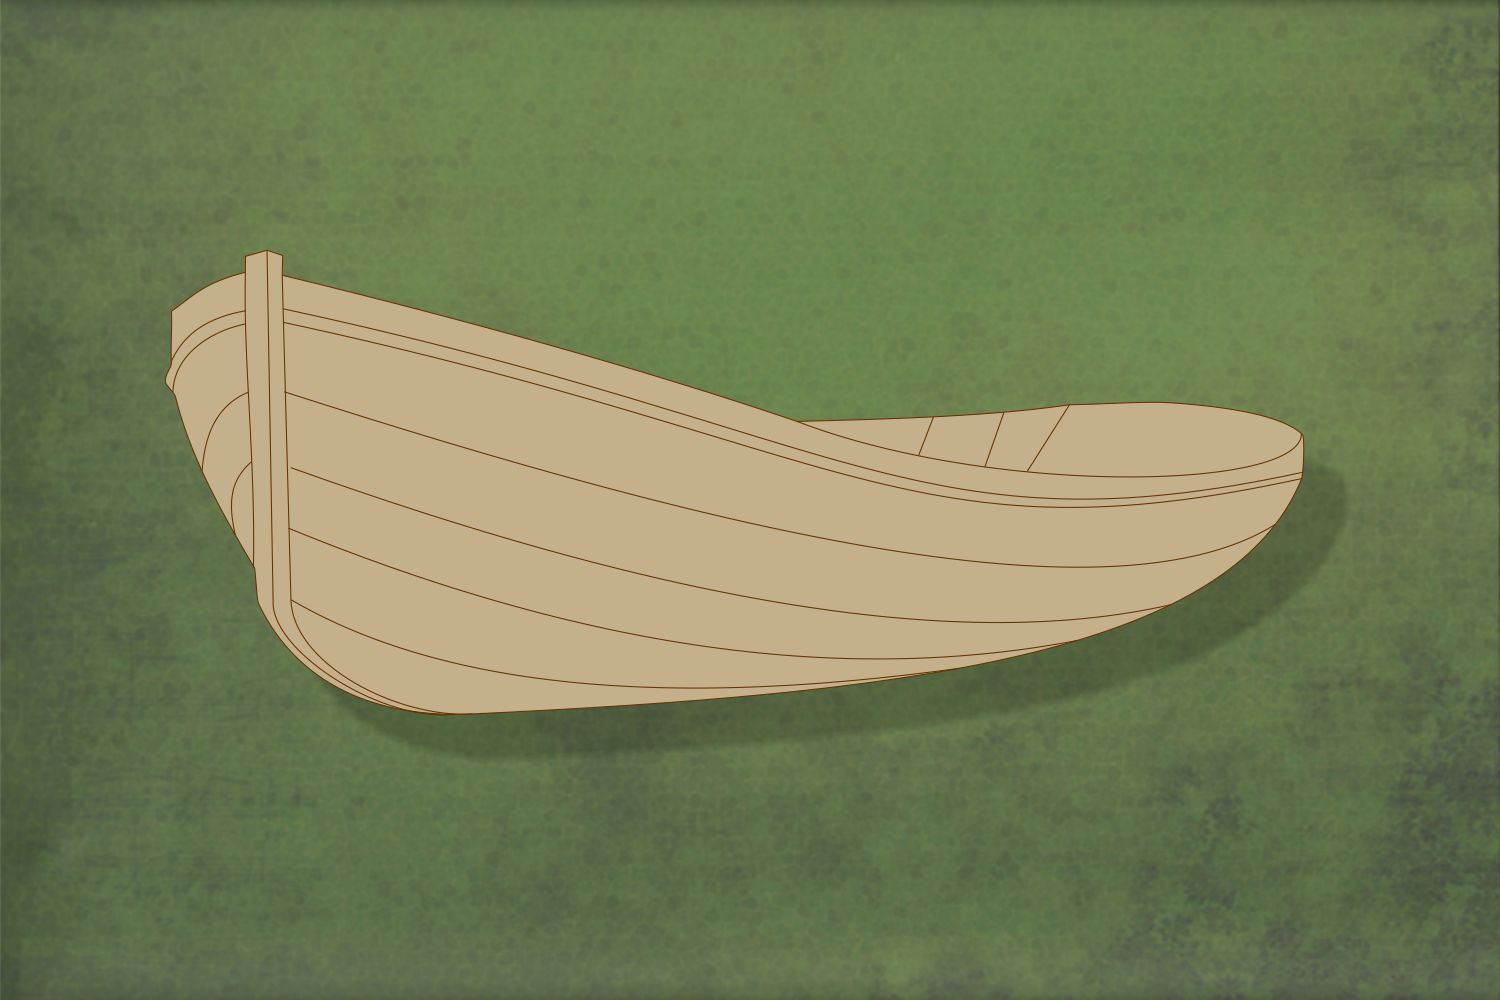 Laser cut, blank wooden Rowing boat 1 with etched detail shape for craft